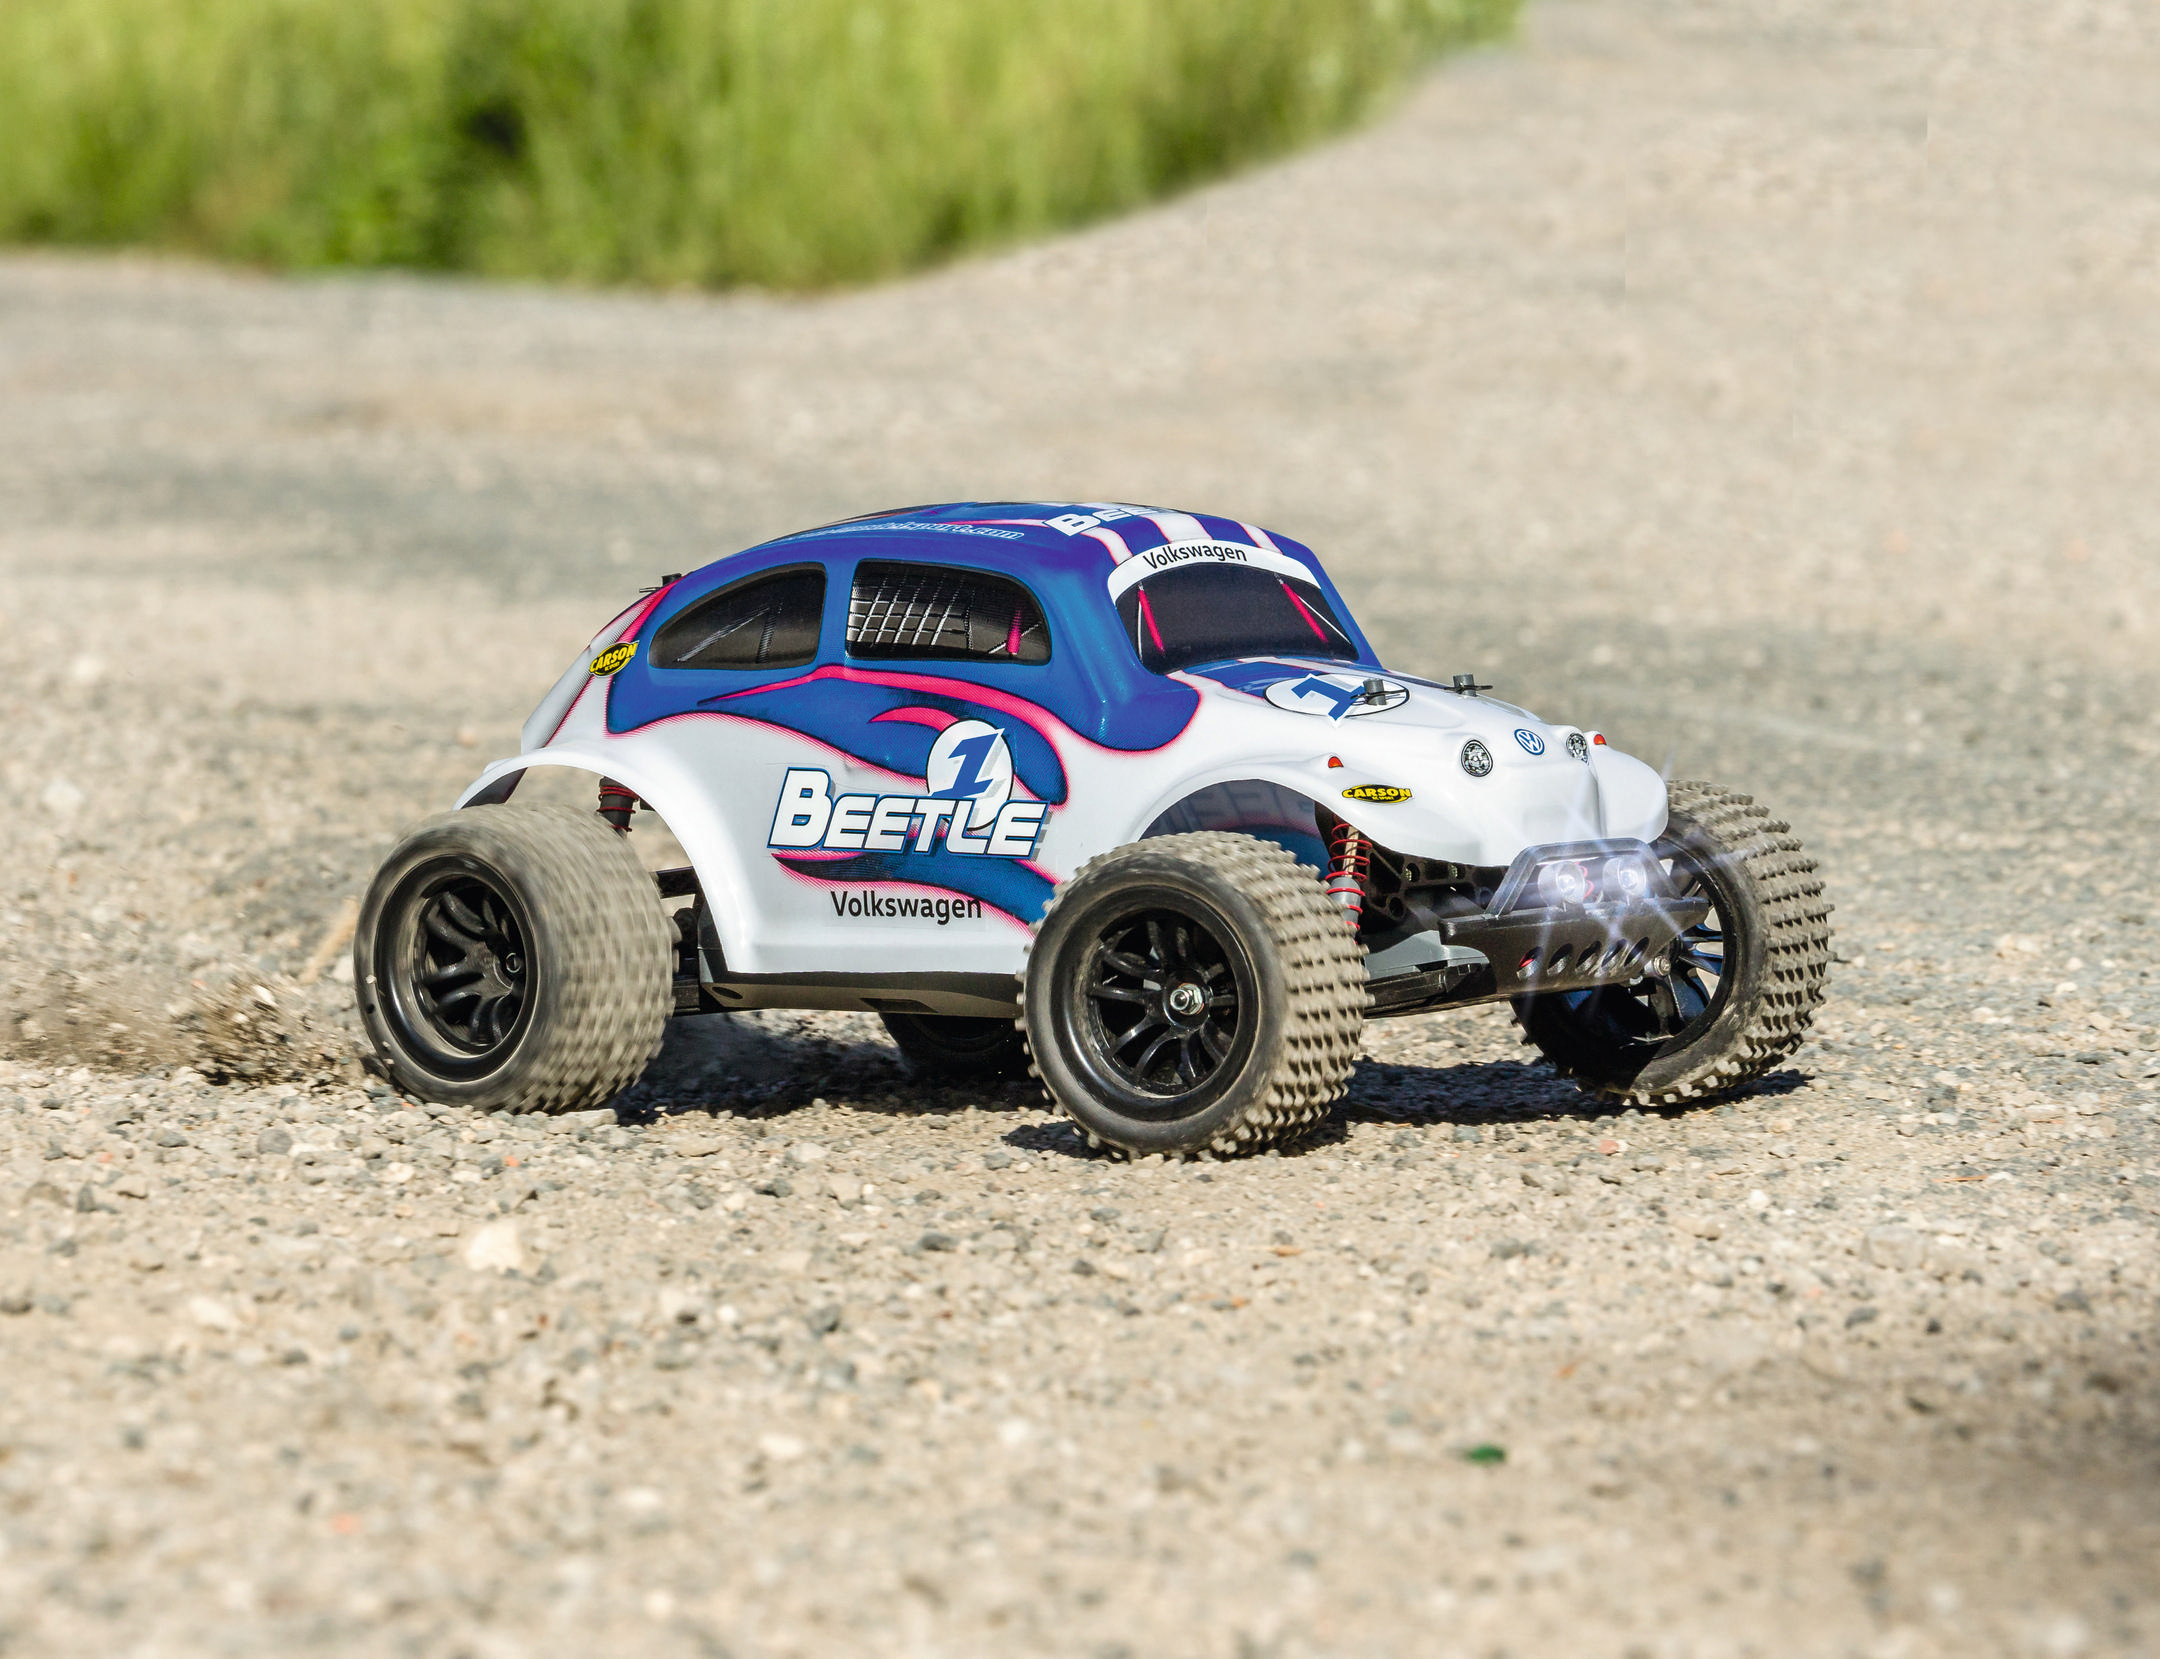 Mehrfarbig RTR VW Spielzeugmodell, CARSON FE 1:10 Beetle 2.4G 100%